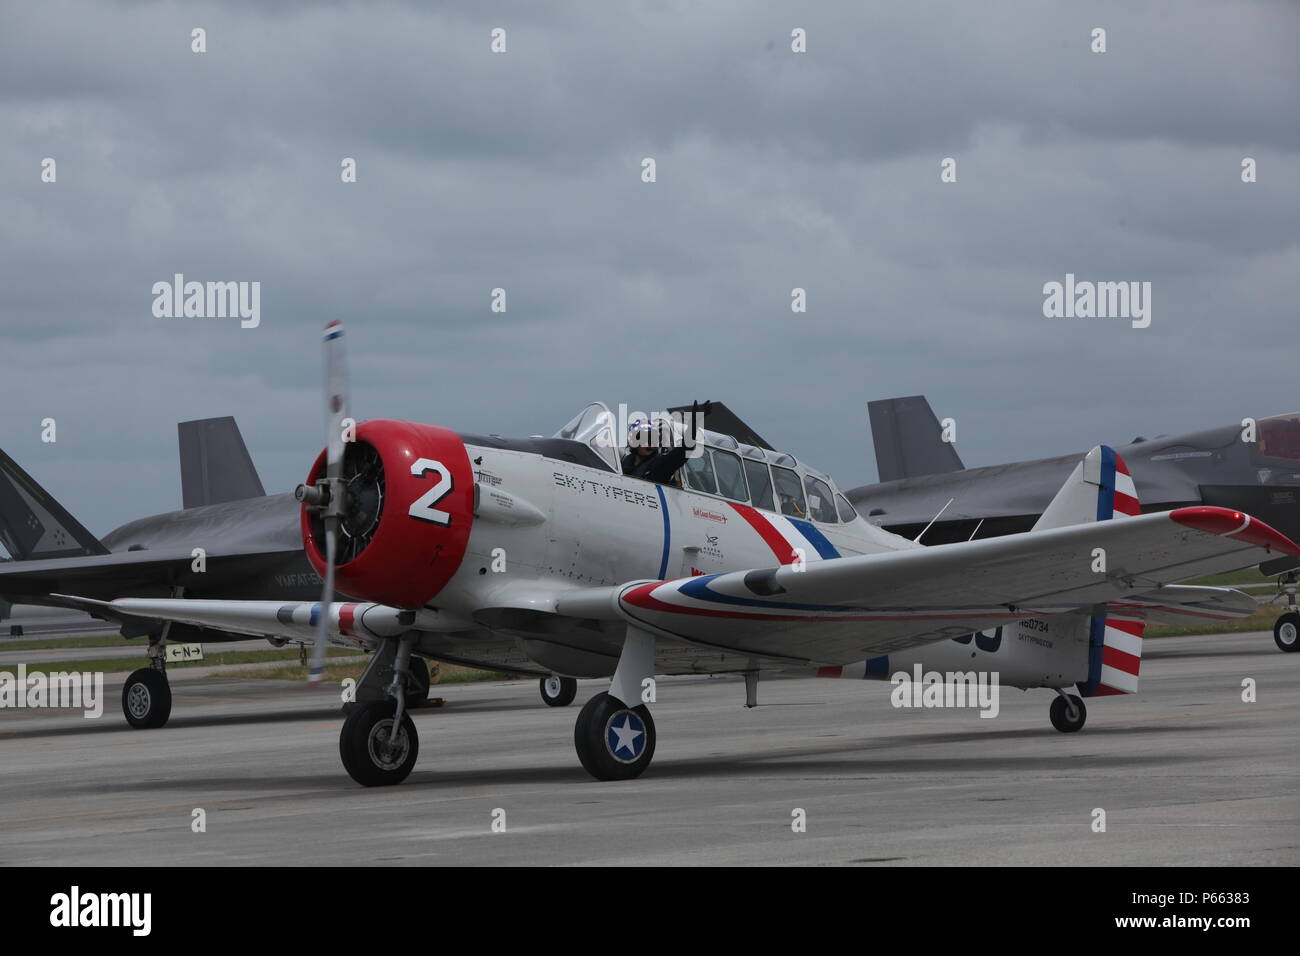 A member of the GEICO Skytypers cruises the flight line after an aerbatic performance at the 2016 Marine Corps Air Station Cherry Point Air Show – “Celebrating 75 Years” at MCAS Cherry Point, N.C., May 1, 2016.  The GEICO Skytypers’ flight squadron of six SNJ-2 aircraft perform precision flight maneuvers. The team of vintage World War II aircraft is known for skytyping the process of emitting biodegradable vapor in a dot matrix pattern, creating a billboard in the sky. This year’s air show celebrated MCAS Cherry Point and 2nd Marine Aircraft Wing’s 75th anniversary and featured 40 static displ Stock Photo